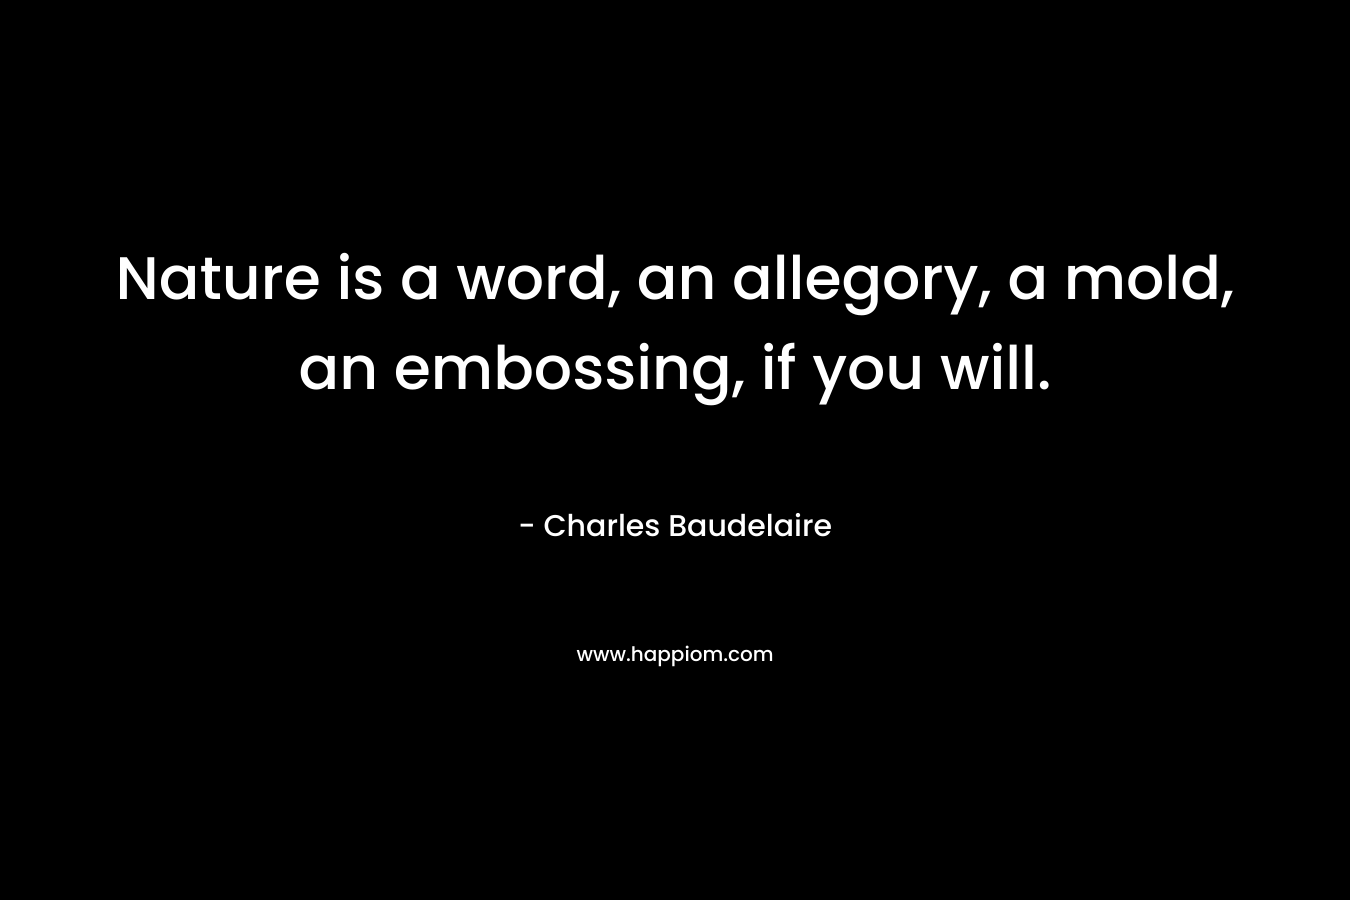 Nature is a word, an allegory, a mold, an embossing, if you will. – Charles Baudelaire